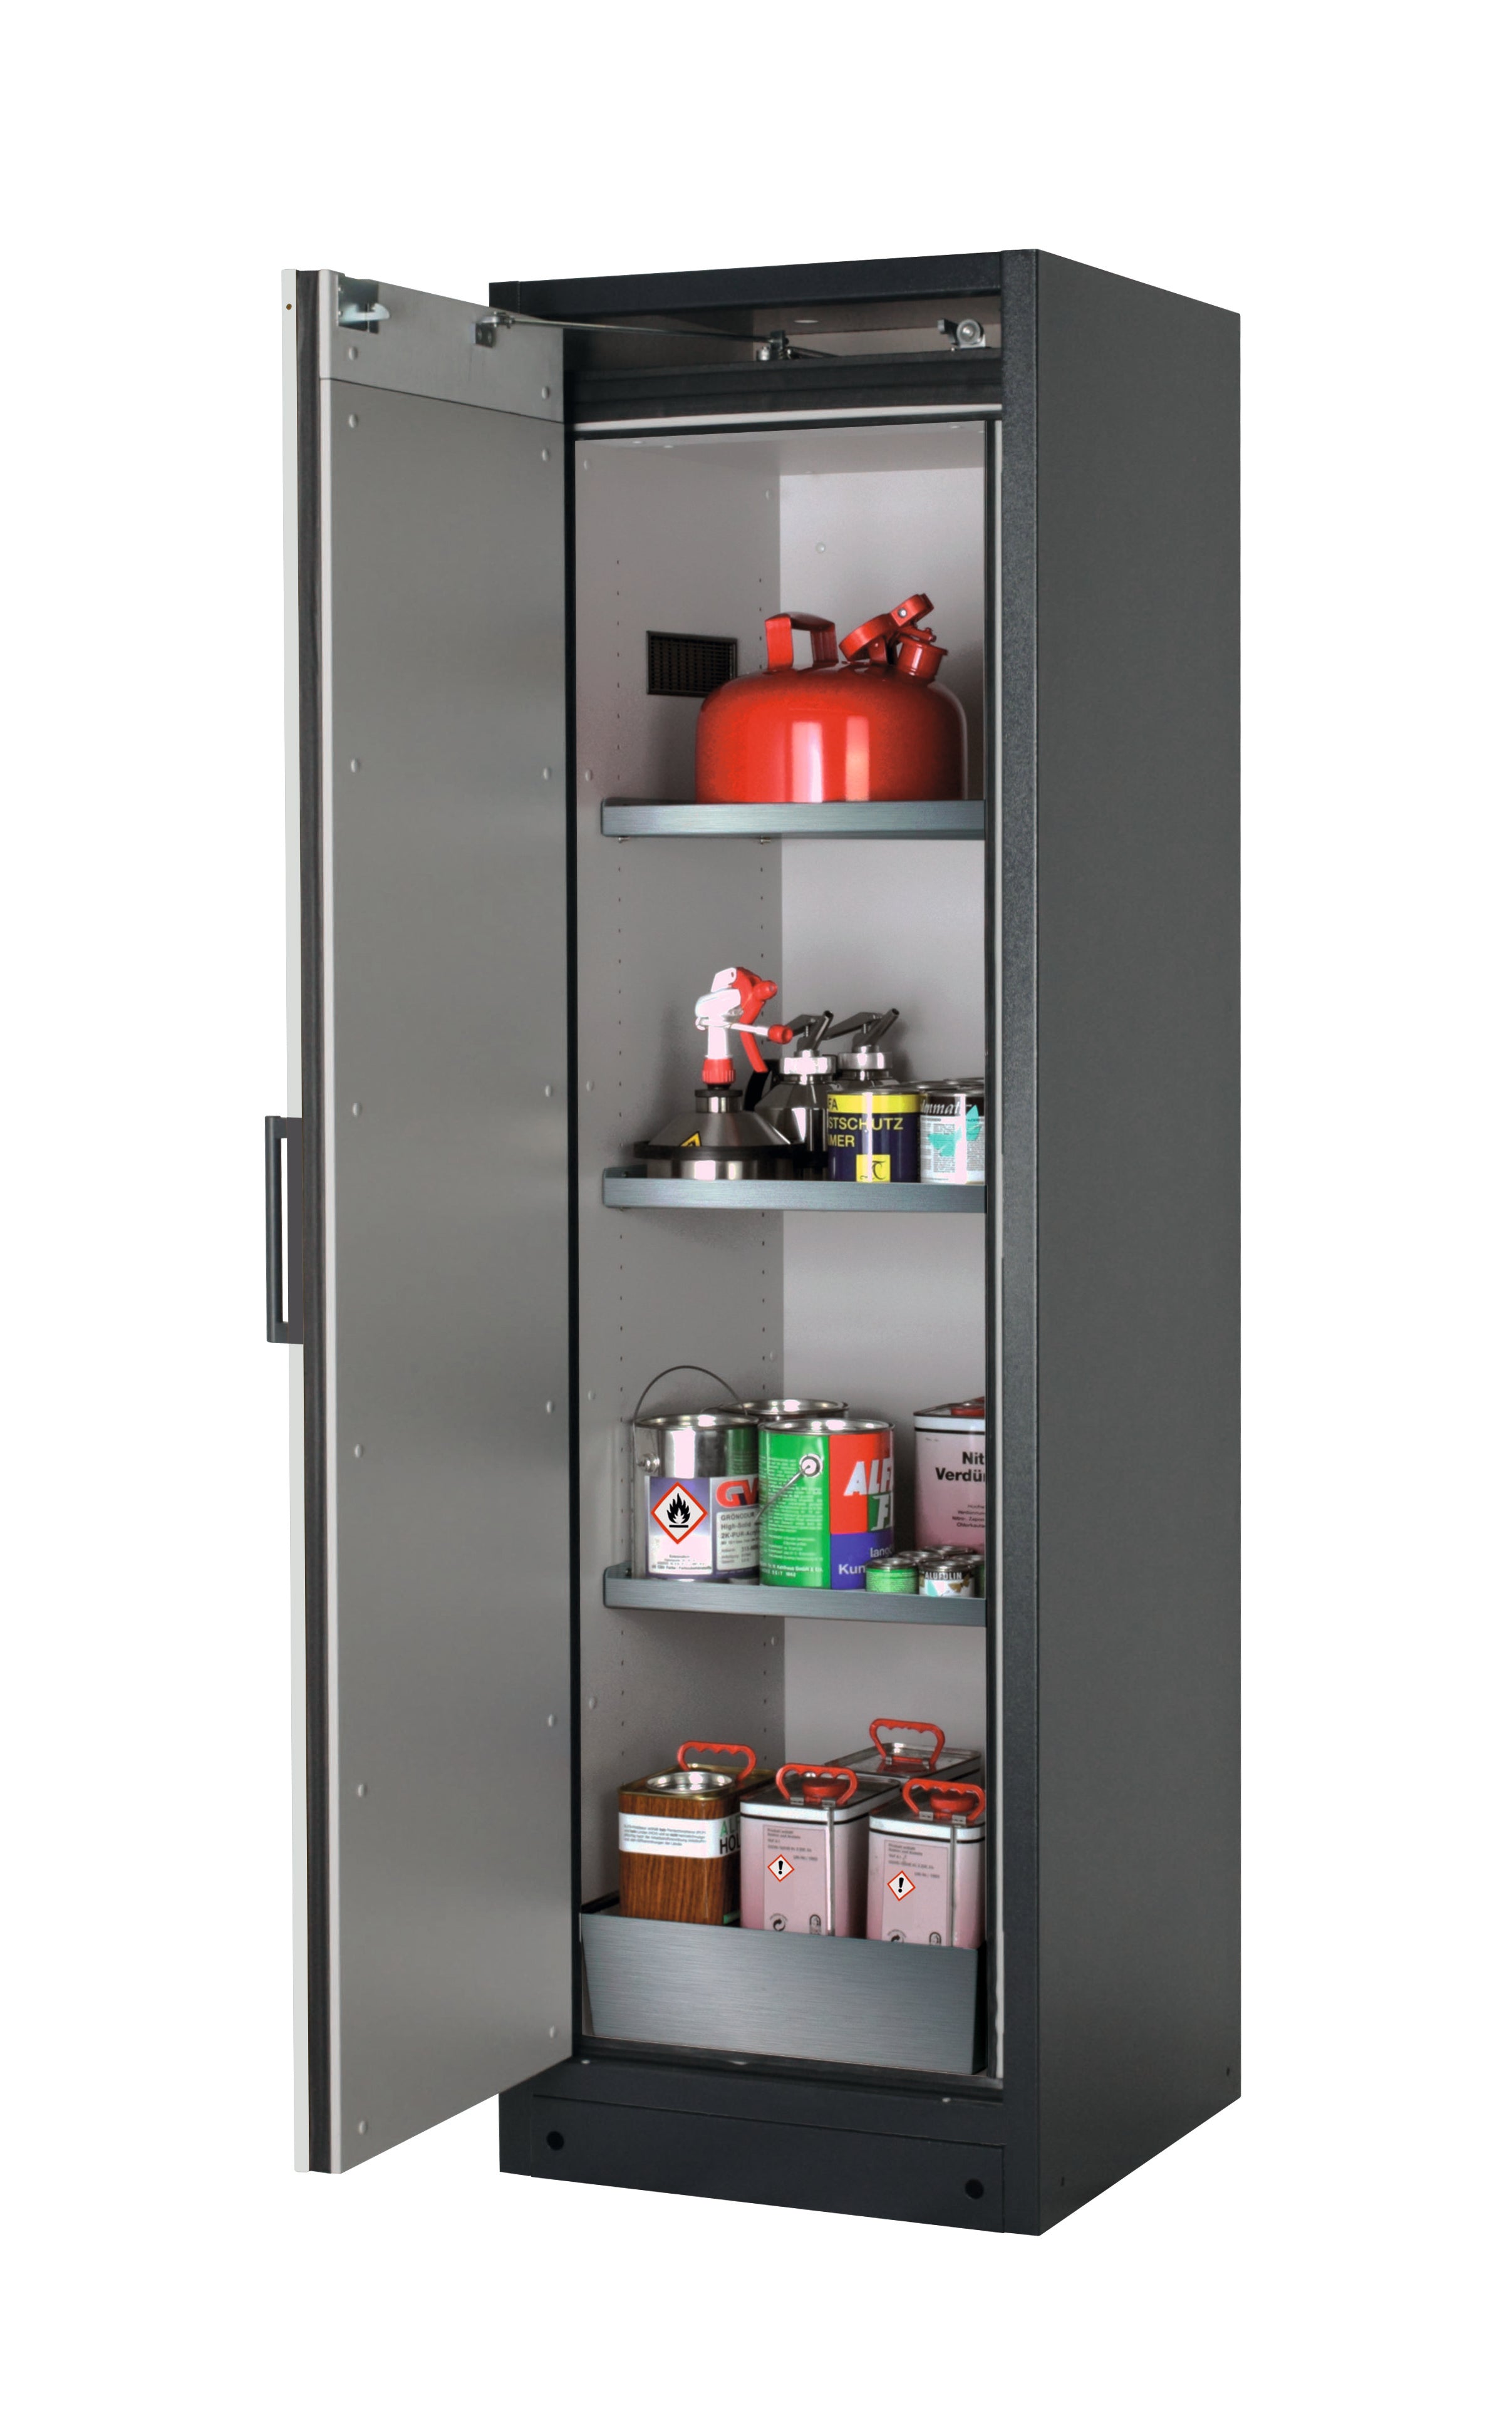 Type 90 safety storage cabinet Q-CLASSIC-90 model Q90.195.060 in light grey RAL 7035 with 3x shelf standard (stainless steel 1.4301),